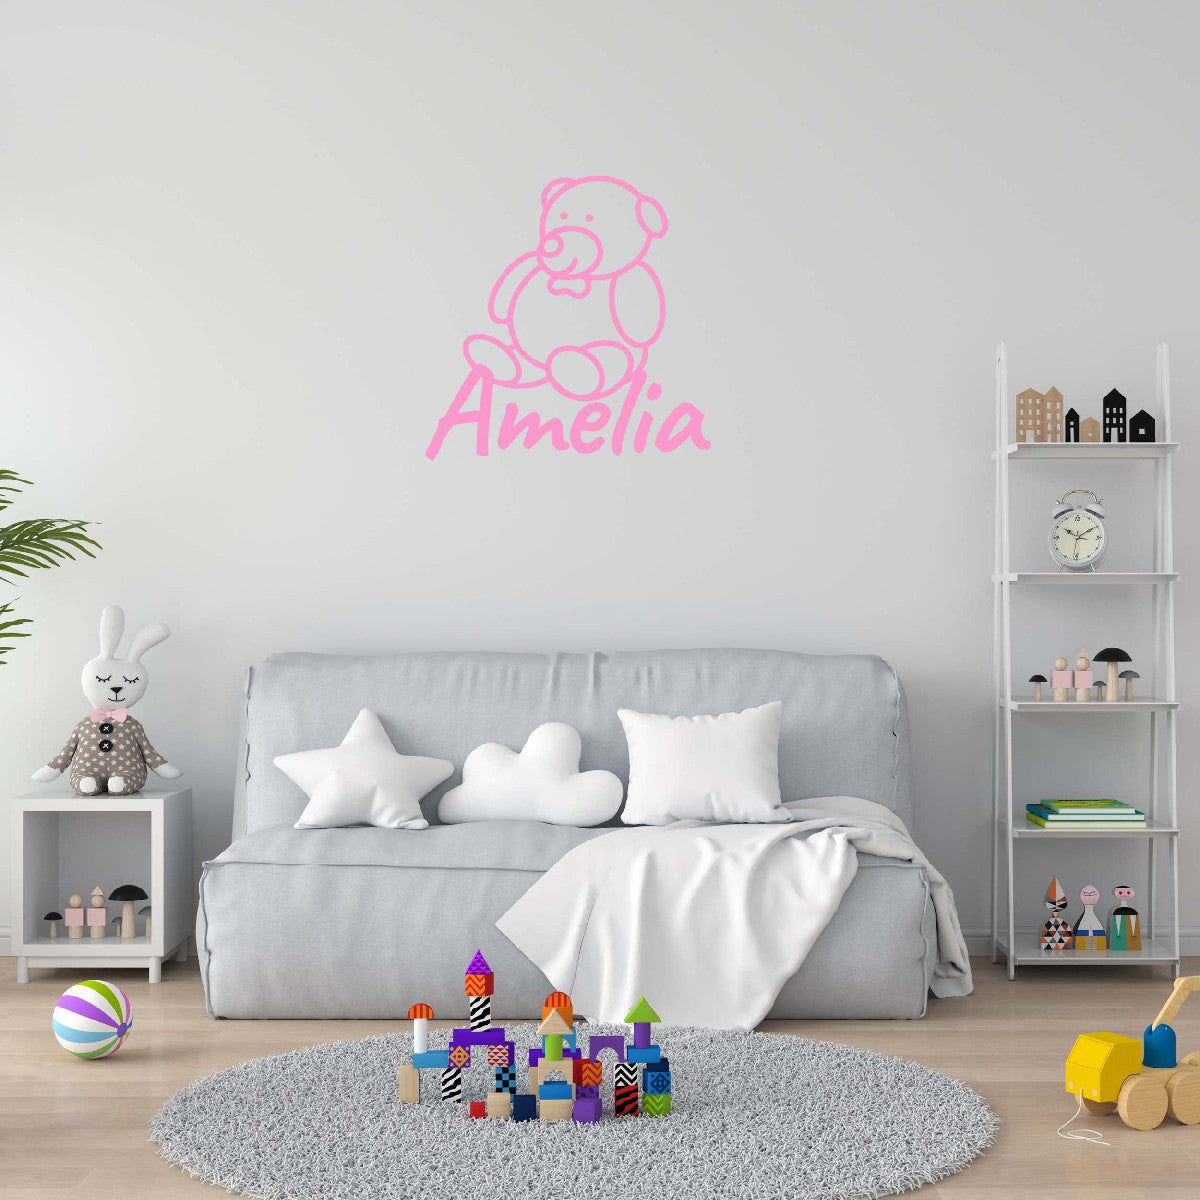 Personalized Name Stickers with Teddy Bear - Easily-Applied Custom Name Stickers for Kids Bedroom Laptop Furniture - Lovely Name Wall Decals for Girls and Boys